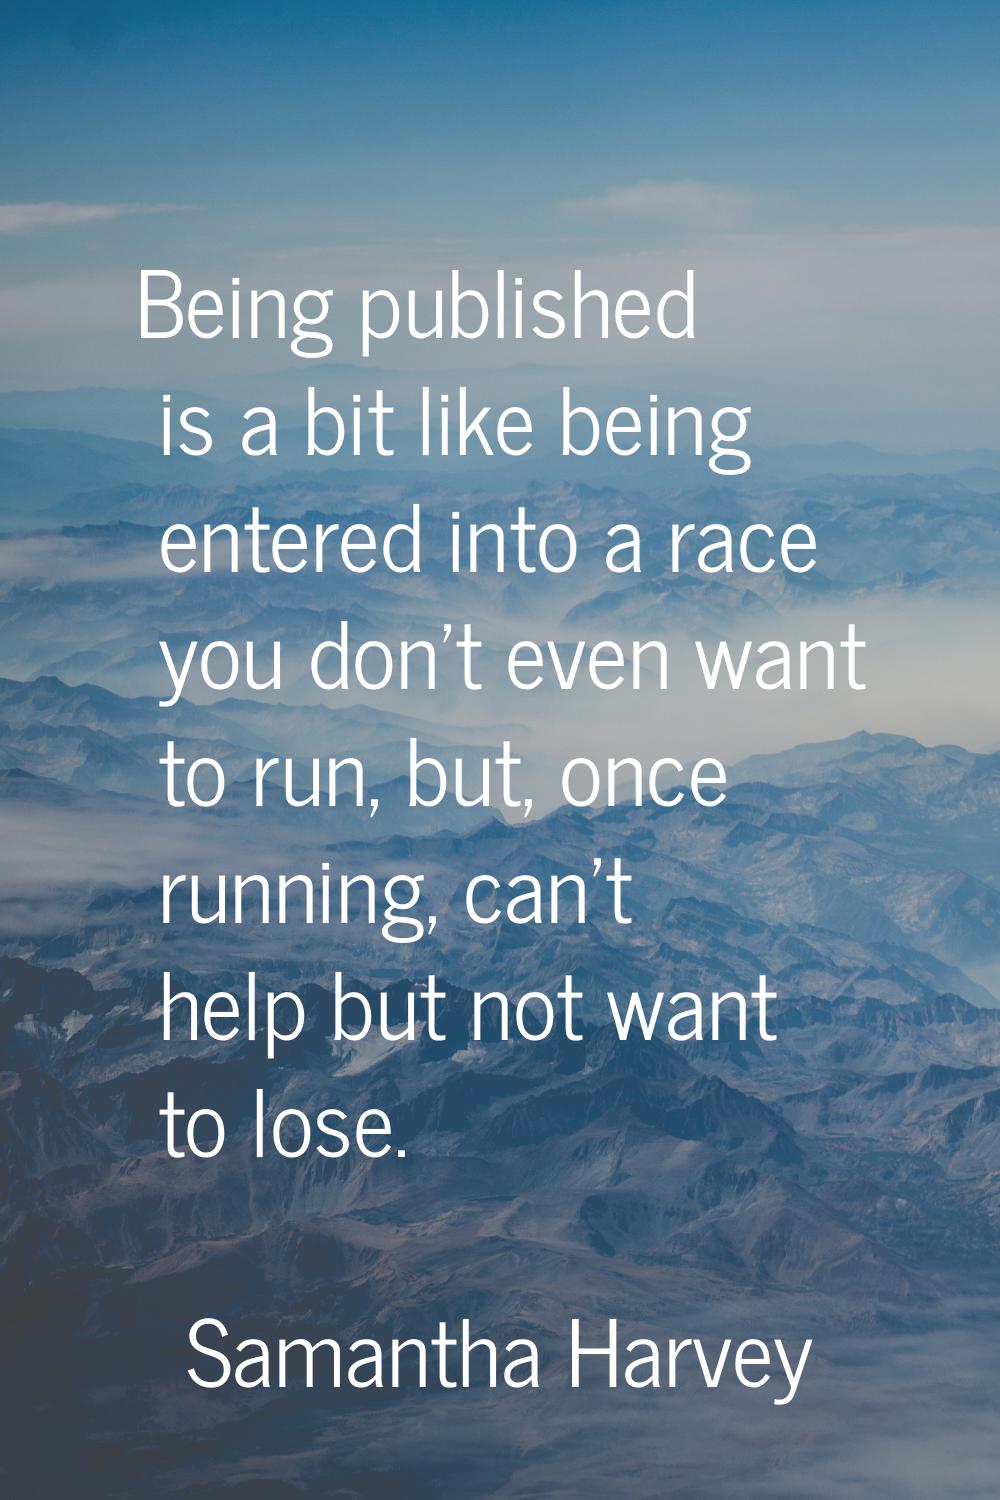 Being published is a bit like being entered into a race you don't even want to run, but, once runni